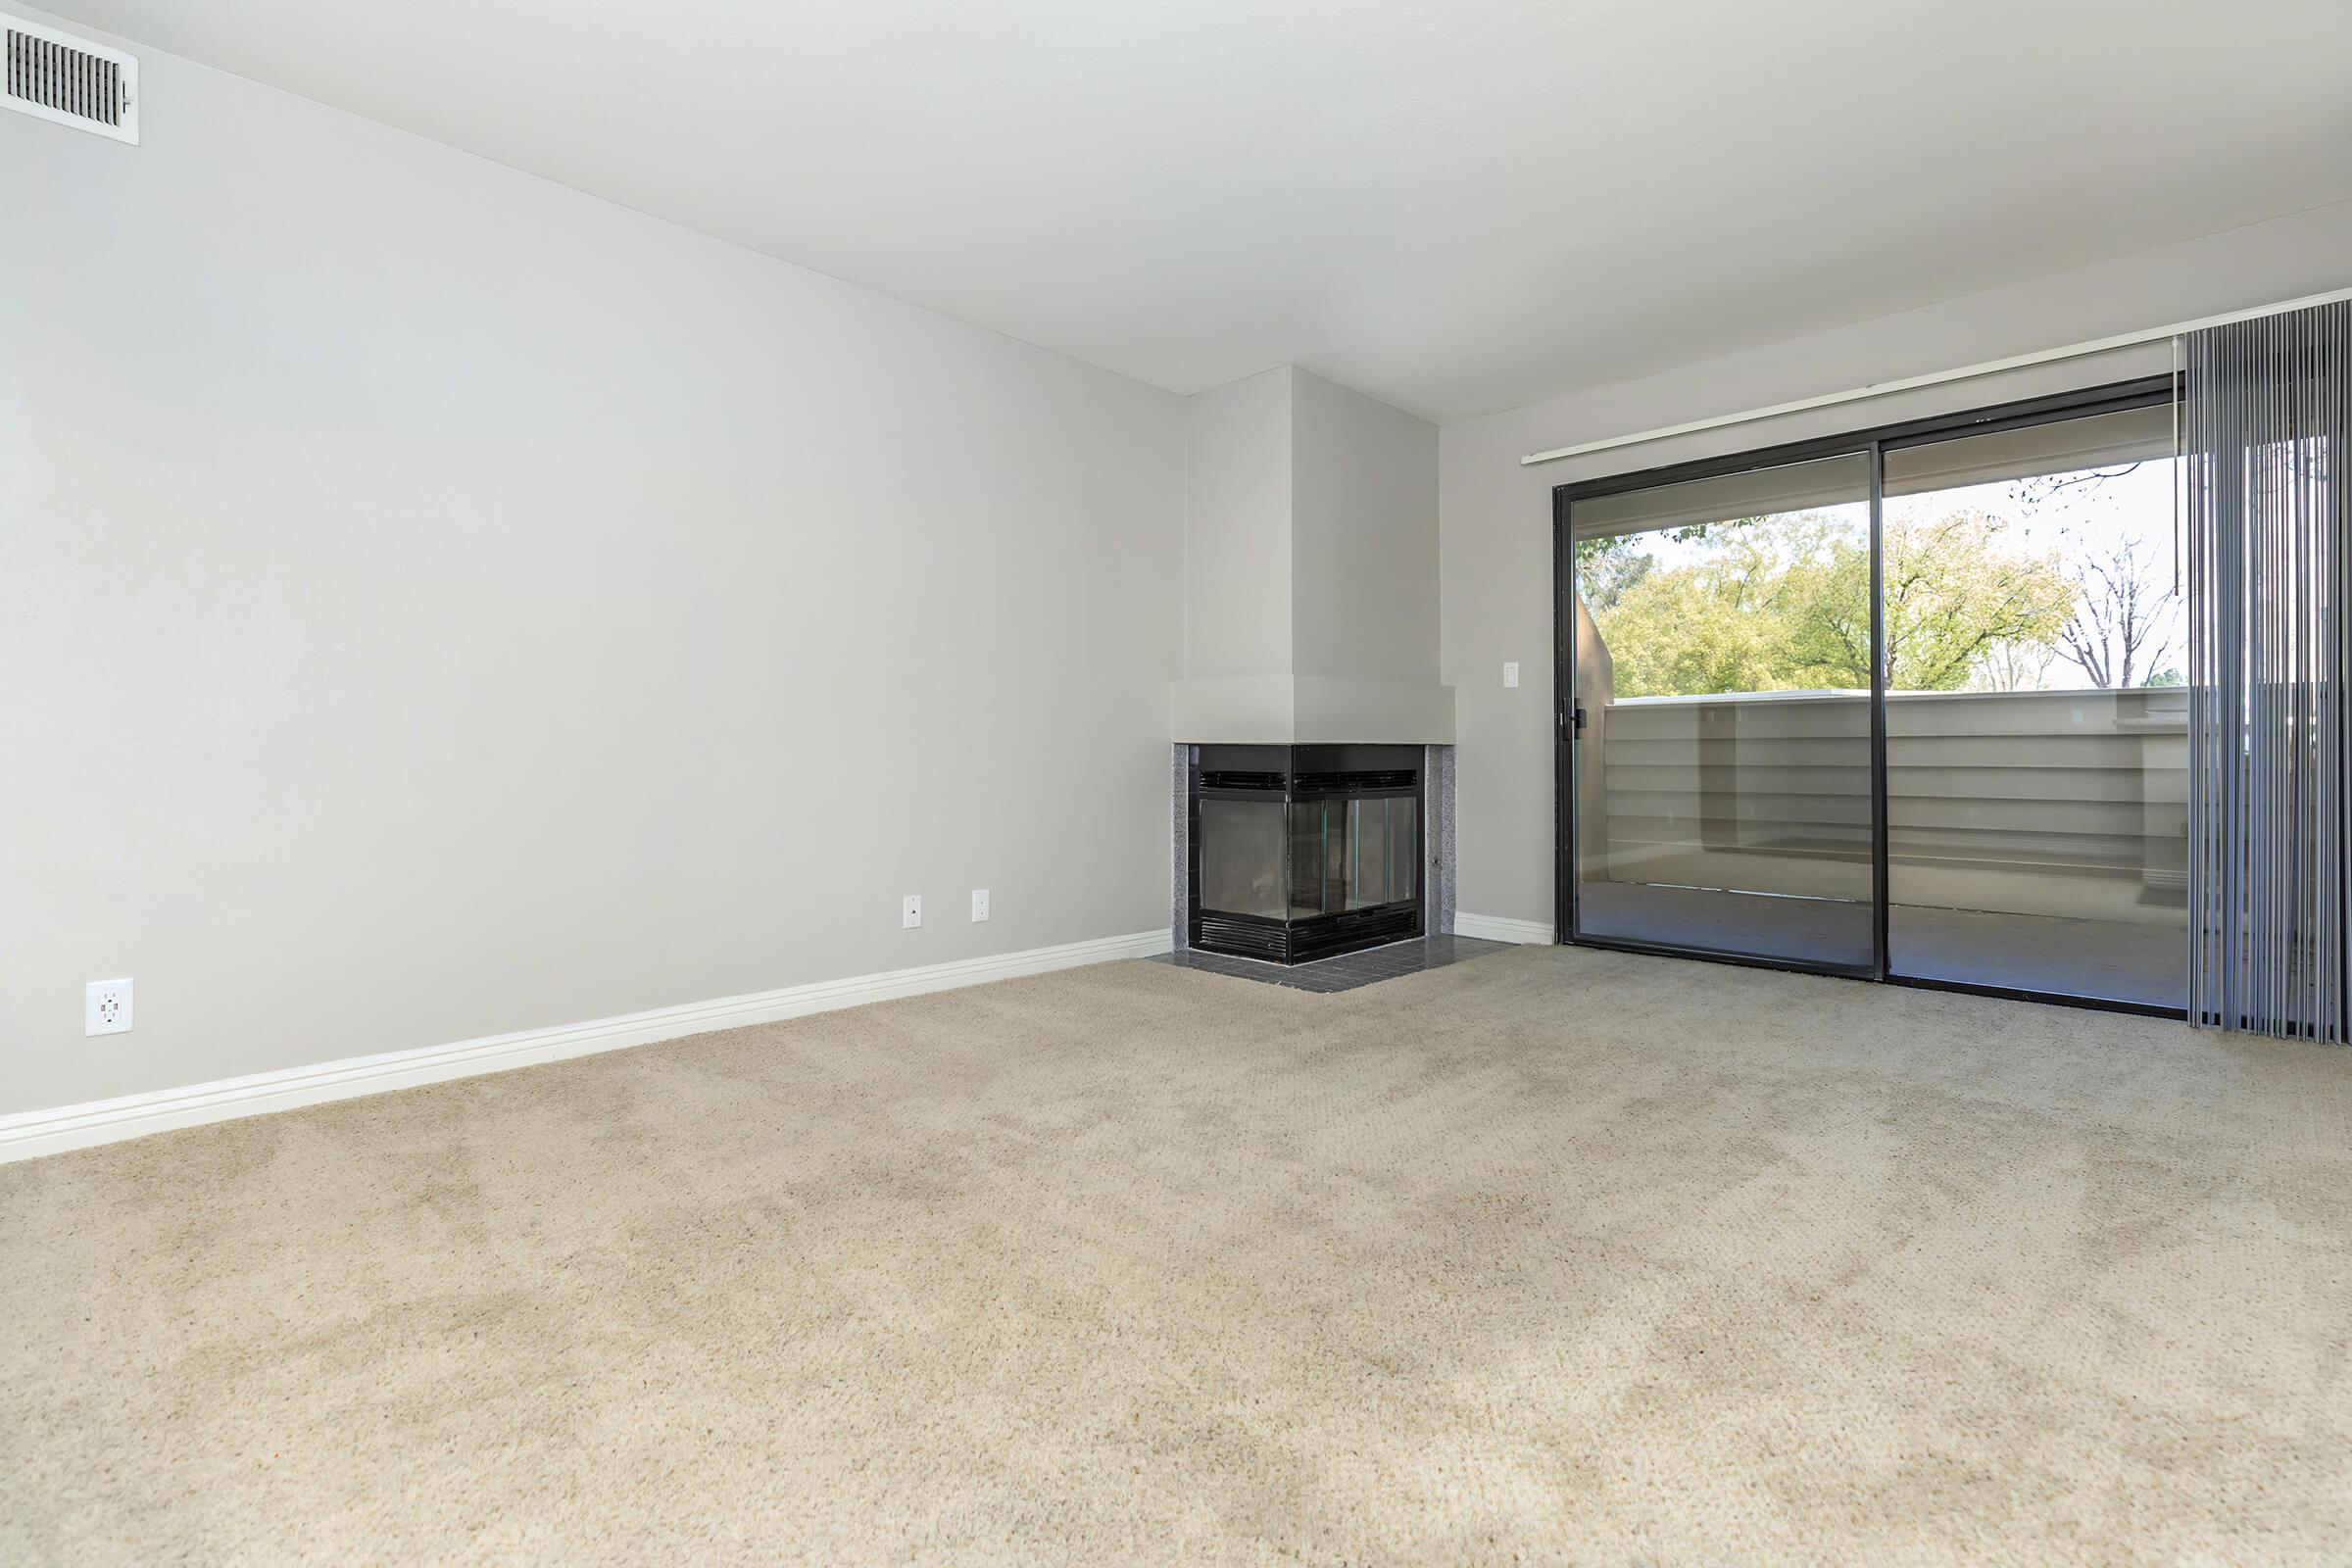 Carpeted living room with sliding glass doors to balcony